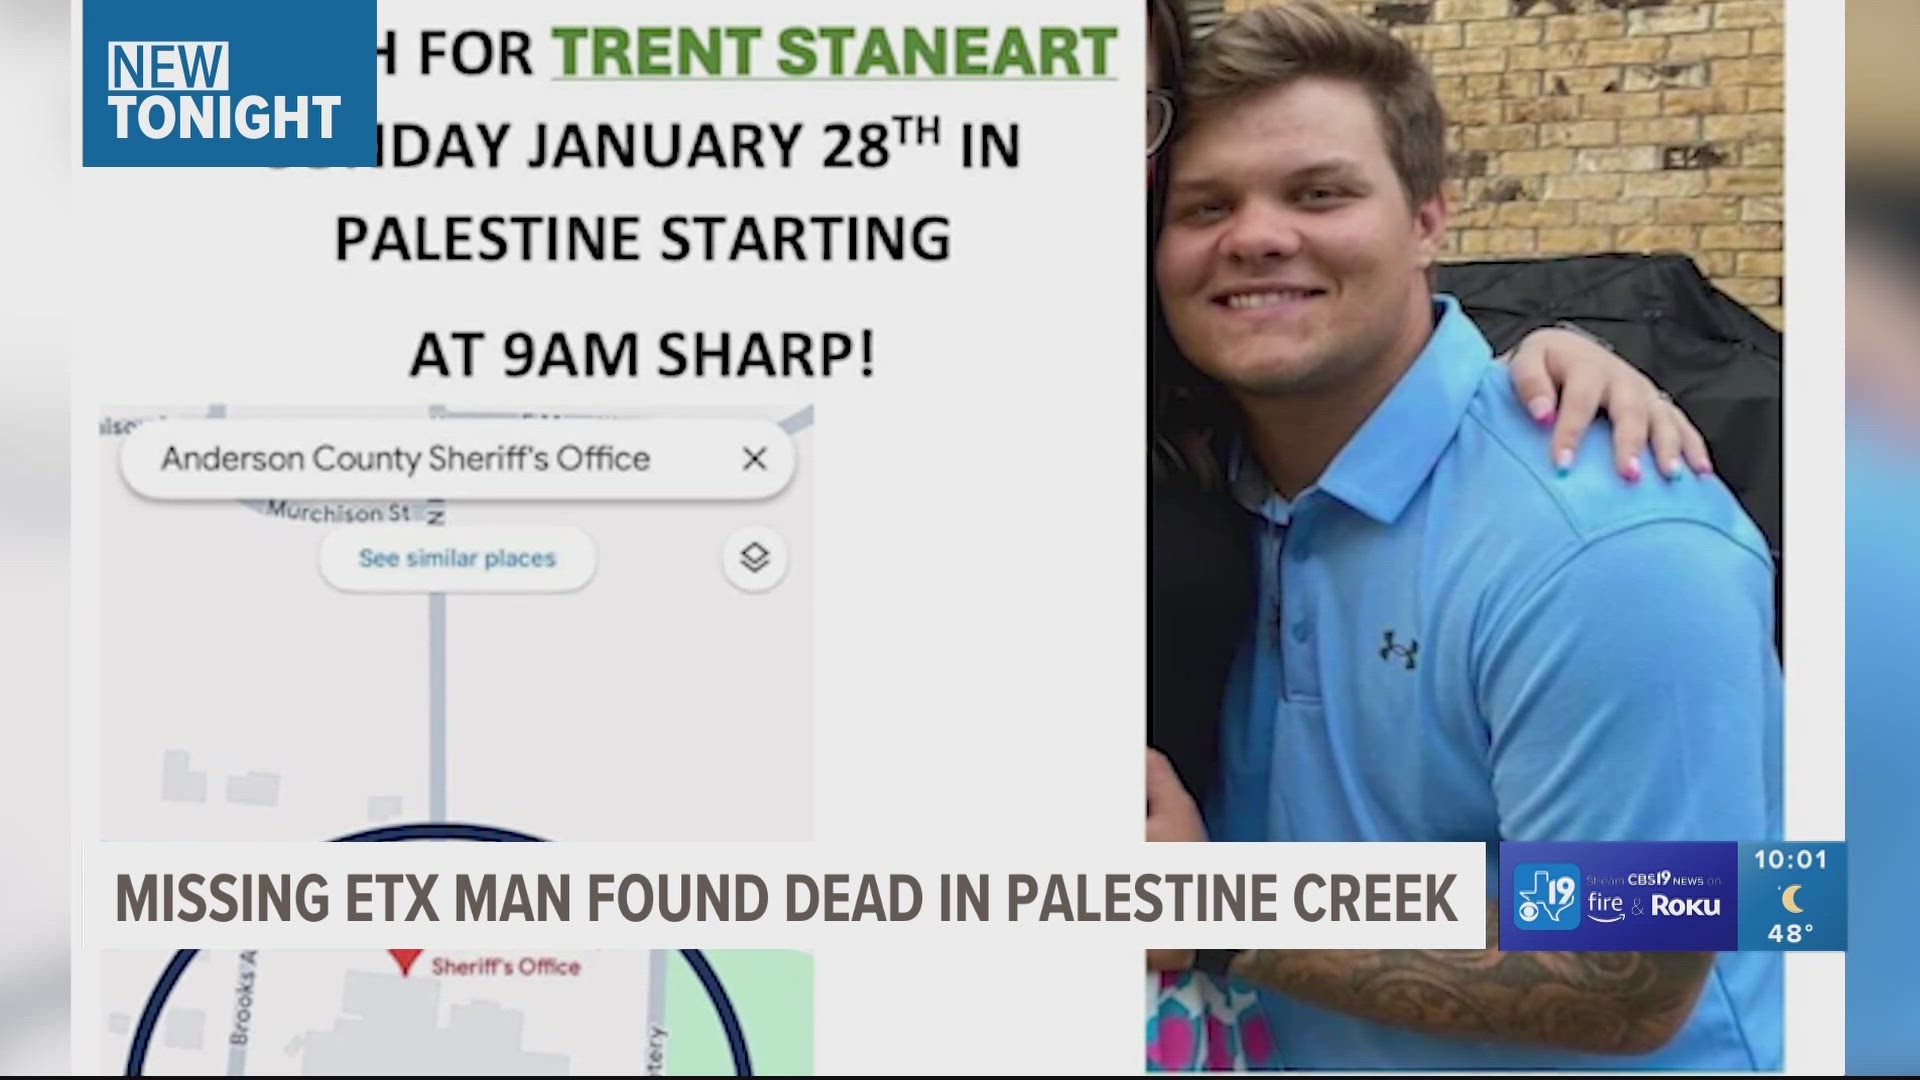 The Palestine Police Department said Trent Staneart was last seen on around 4:45 p.m. on Saturday, Jan. 20, leaving the ACSO.